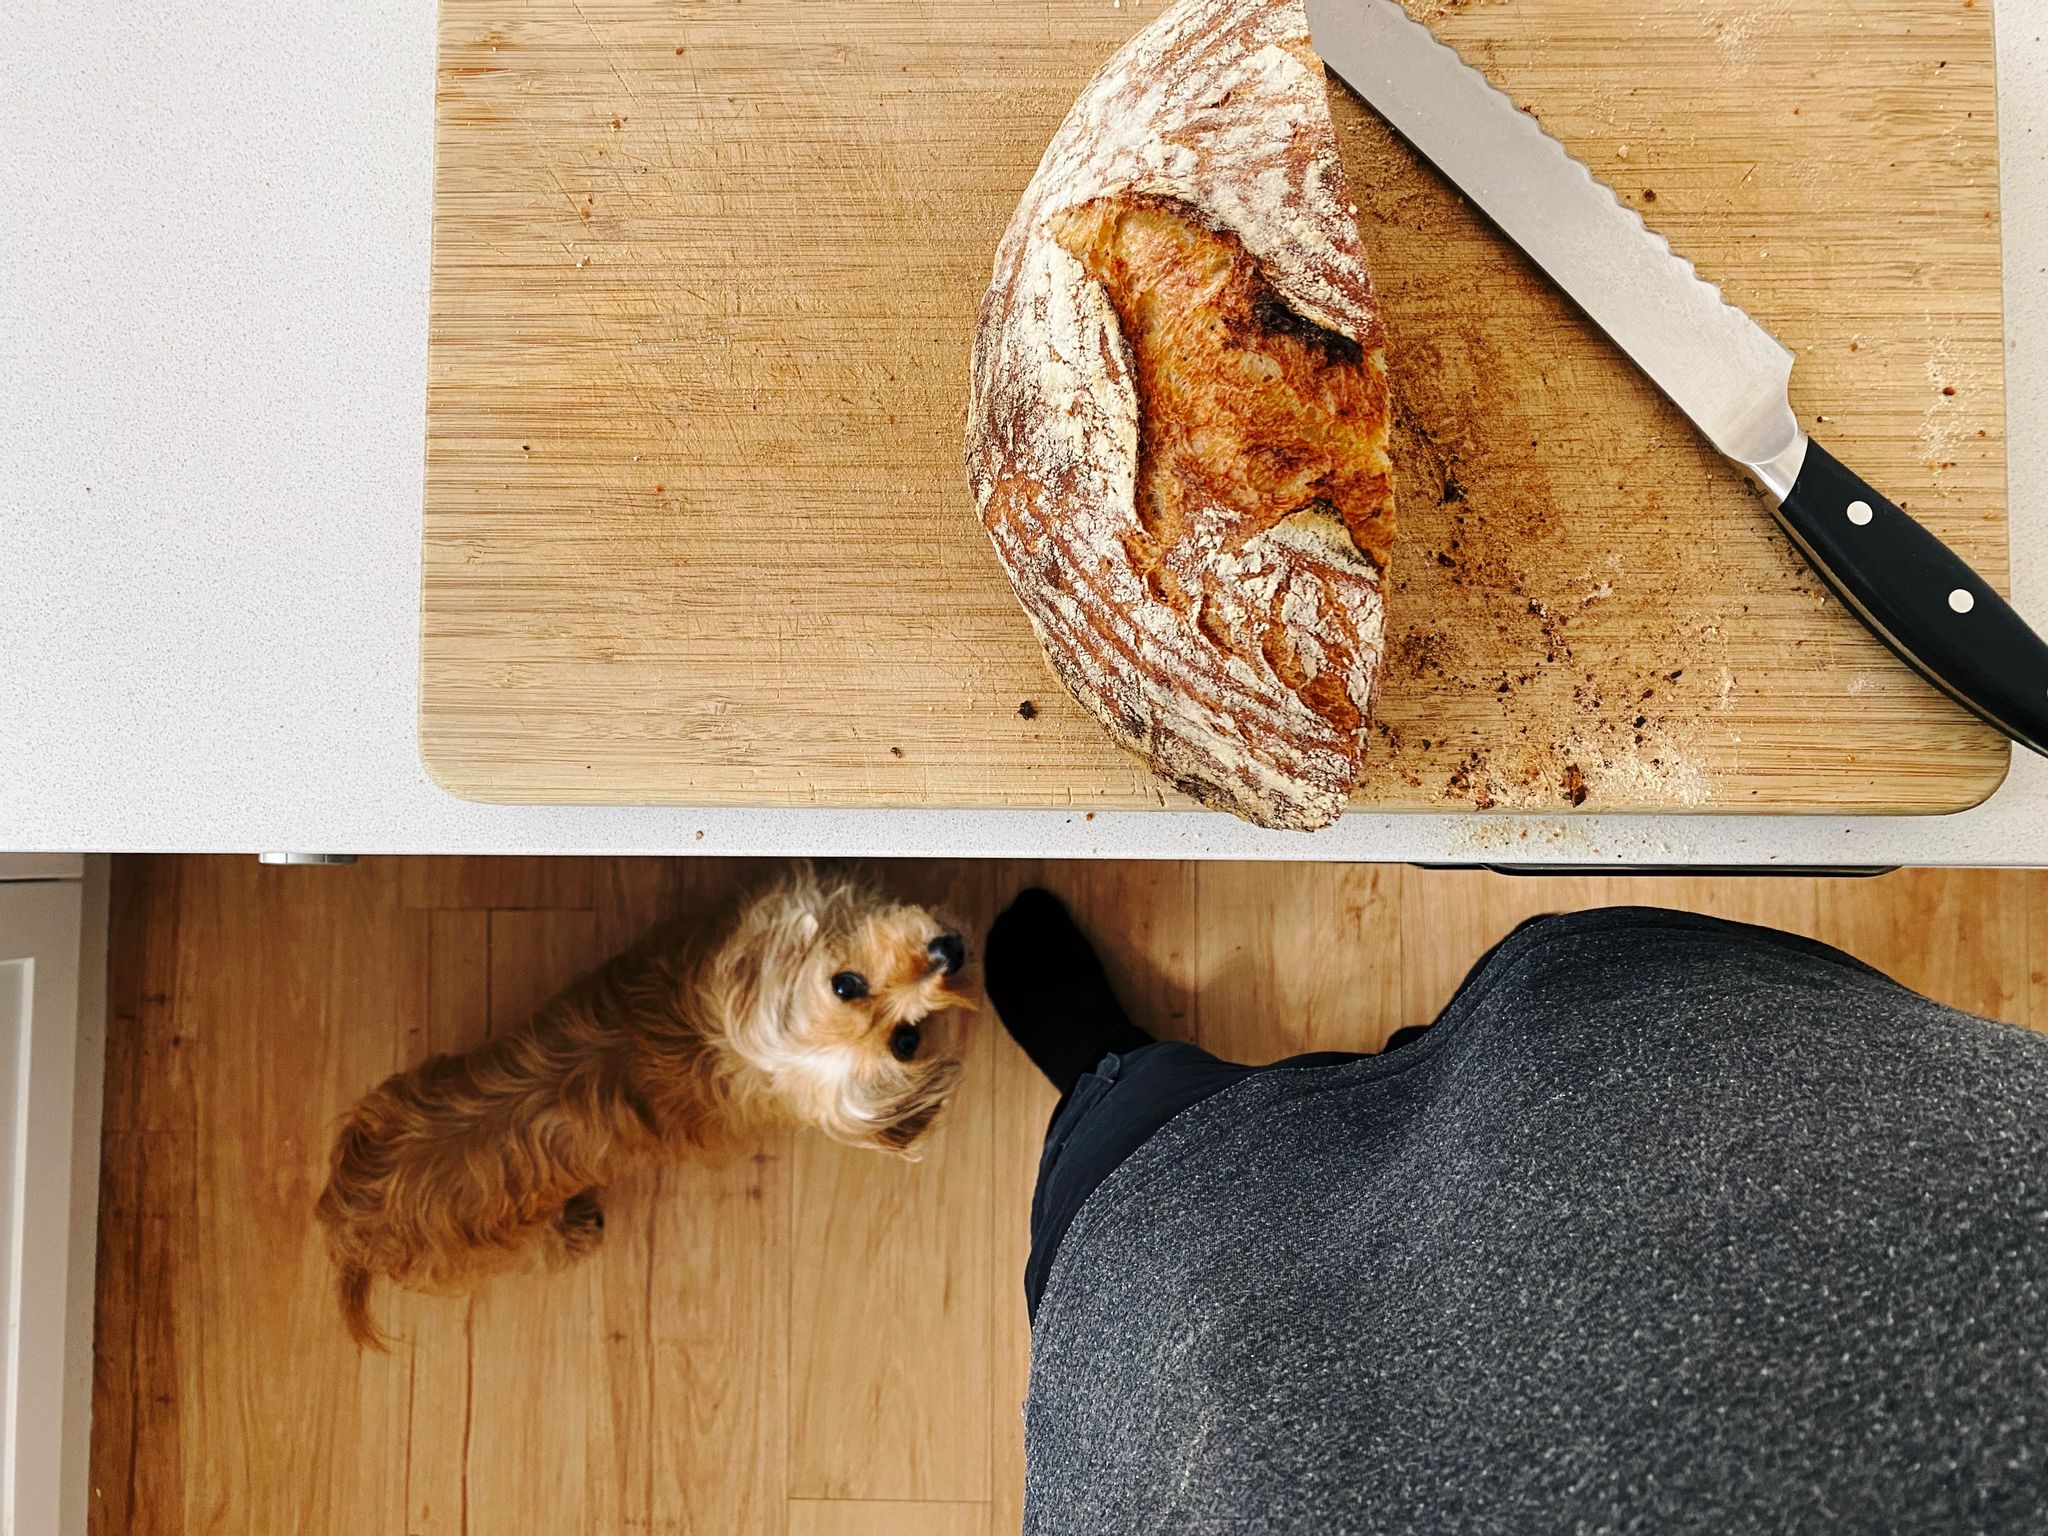 A photo taken from above a kitchen bench top with the floor visible. On the bench is a cutting board with half of a round loaf of bread in the middle of being cut, and standing directly next to my feet on the floor is a small scruffy blonde dog staring directly up at me.